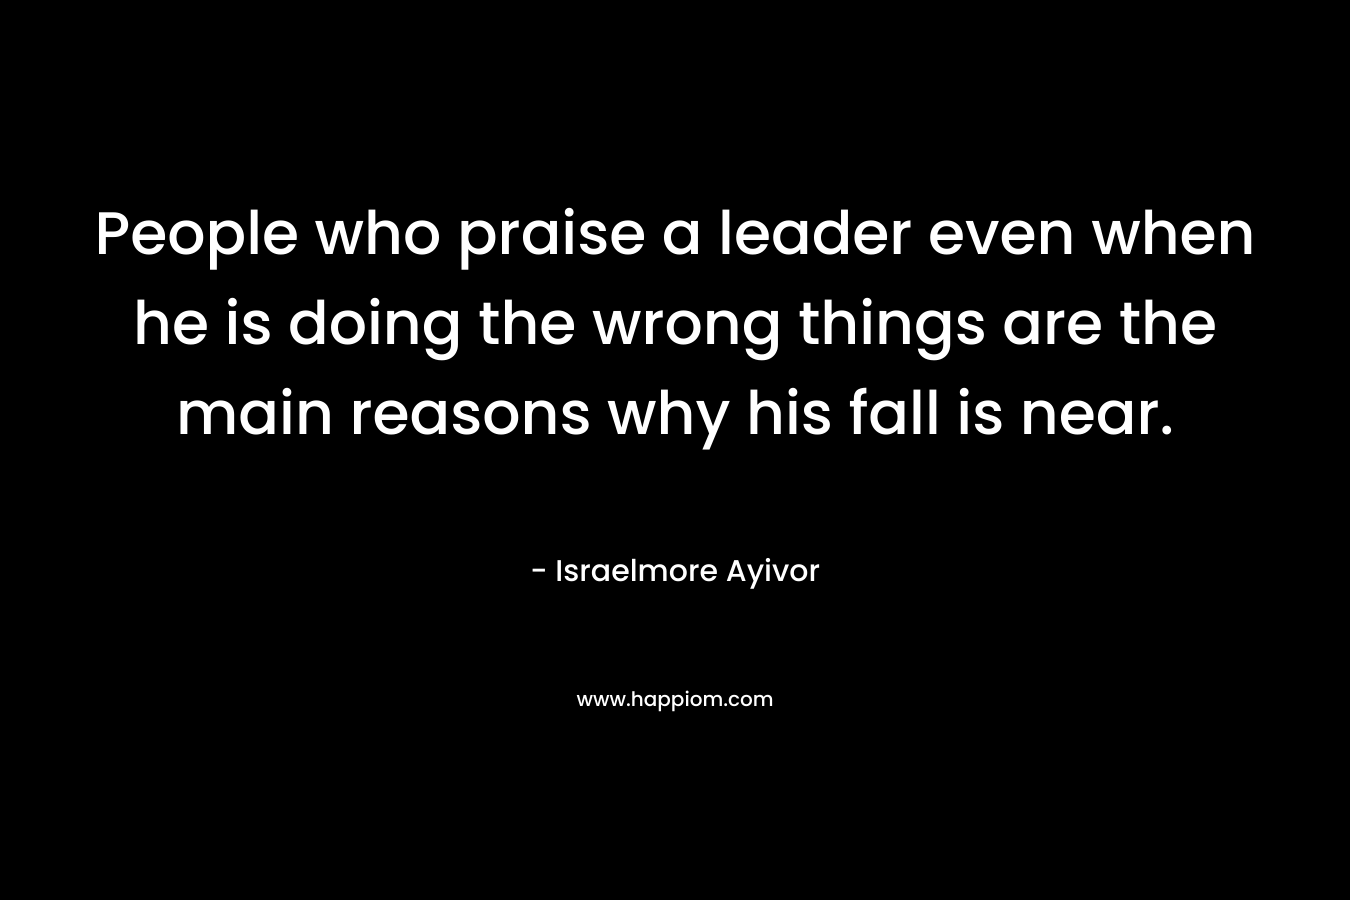 People who praise a leader even when he is doing the wrong things are the main reasons why his fall is near.